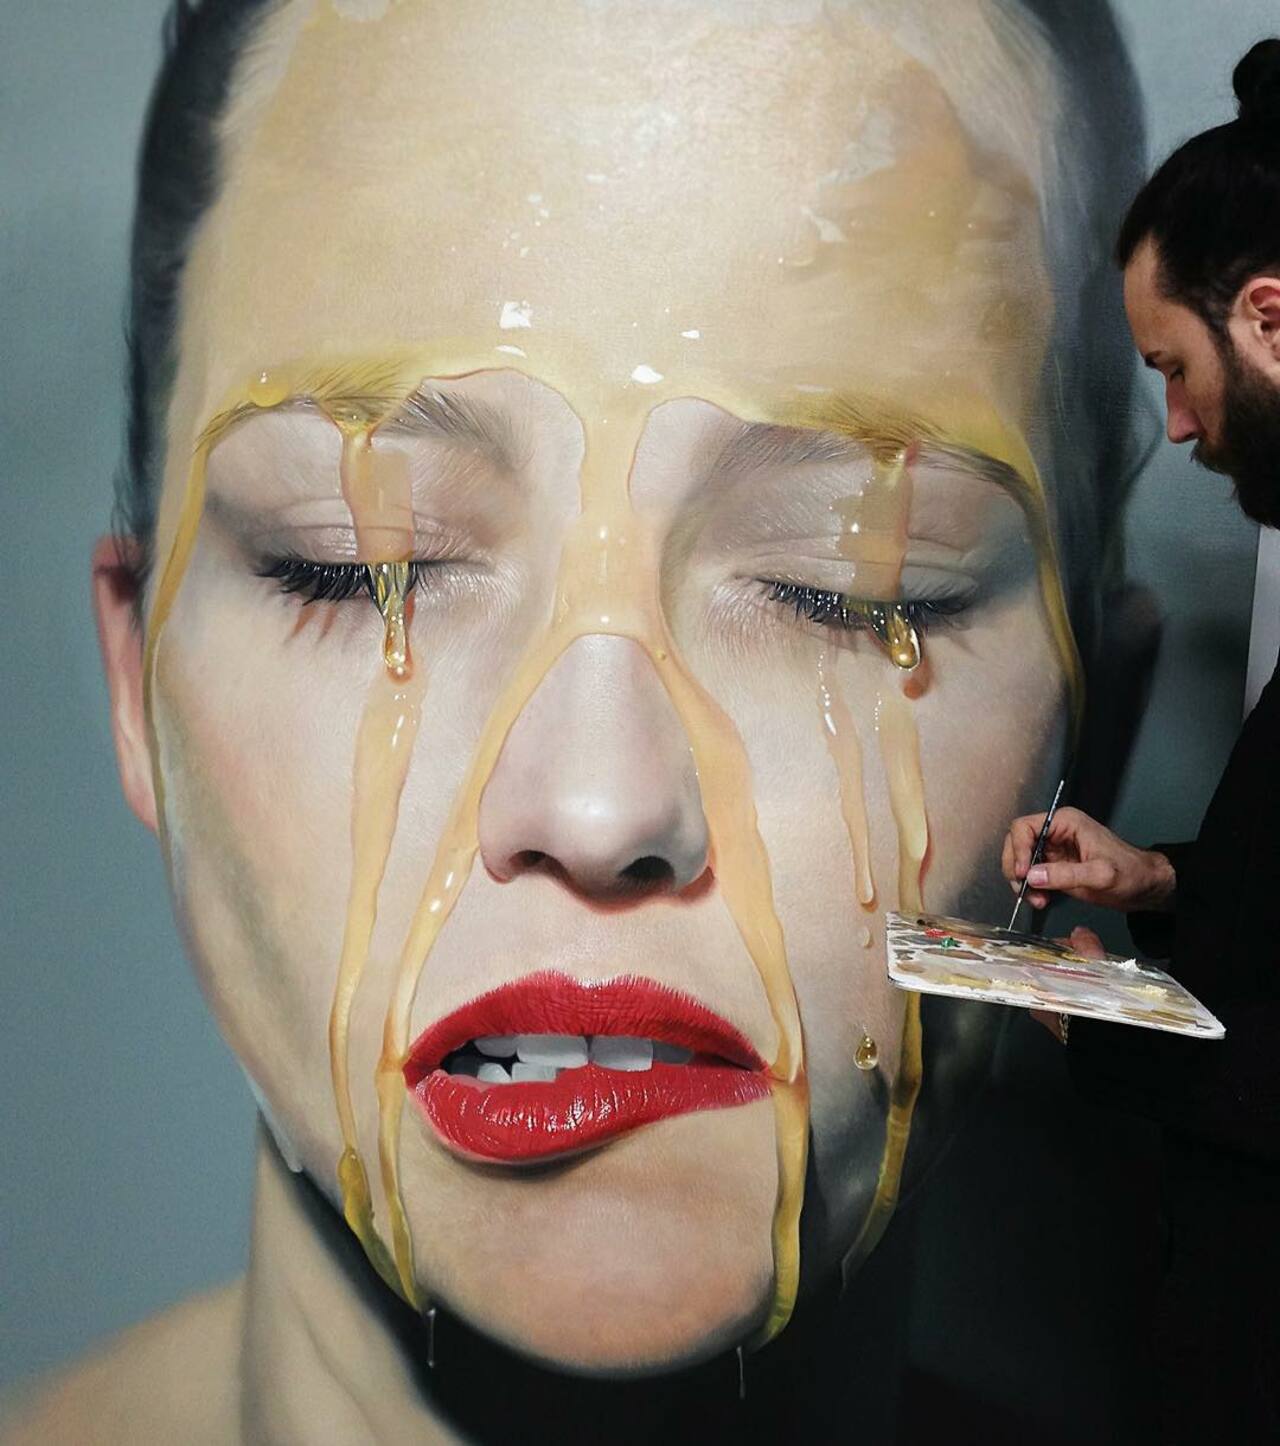 The incredible work of Mike Dargas from Germany. #StreetArt #Graffiti #Mural http://t.co/Q2Tof2W57Z